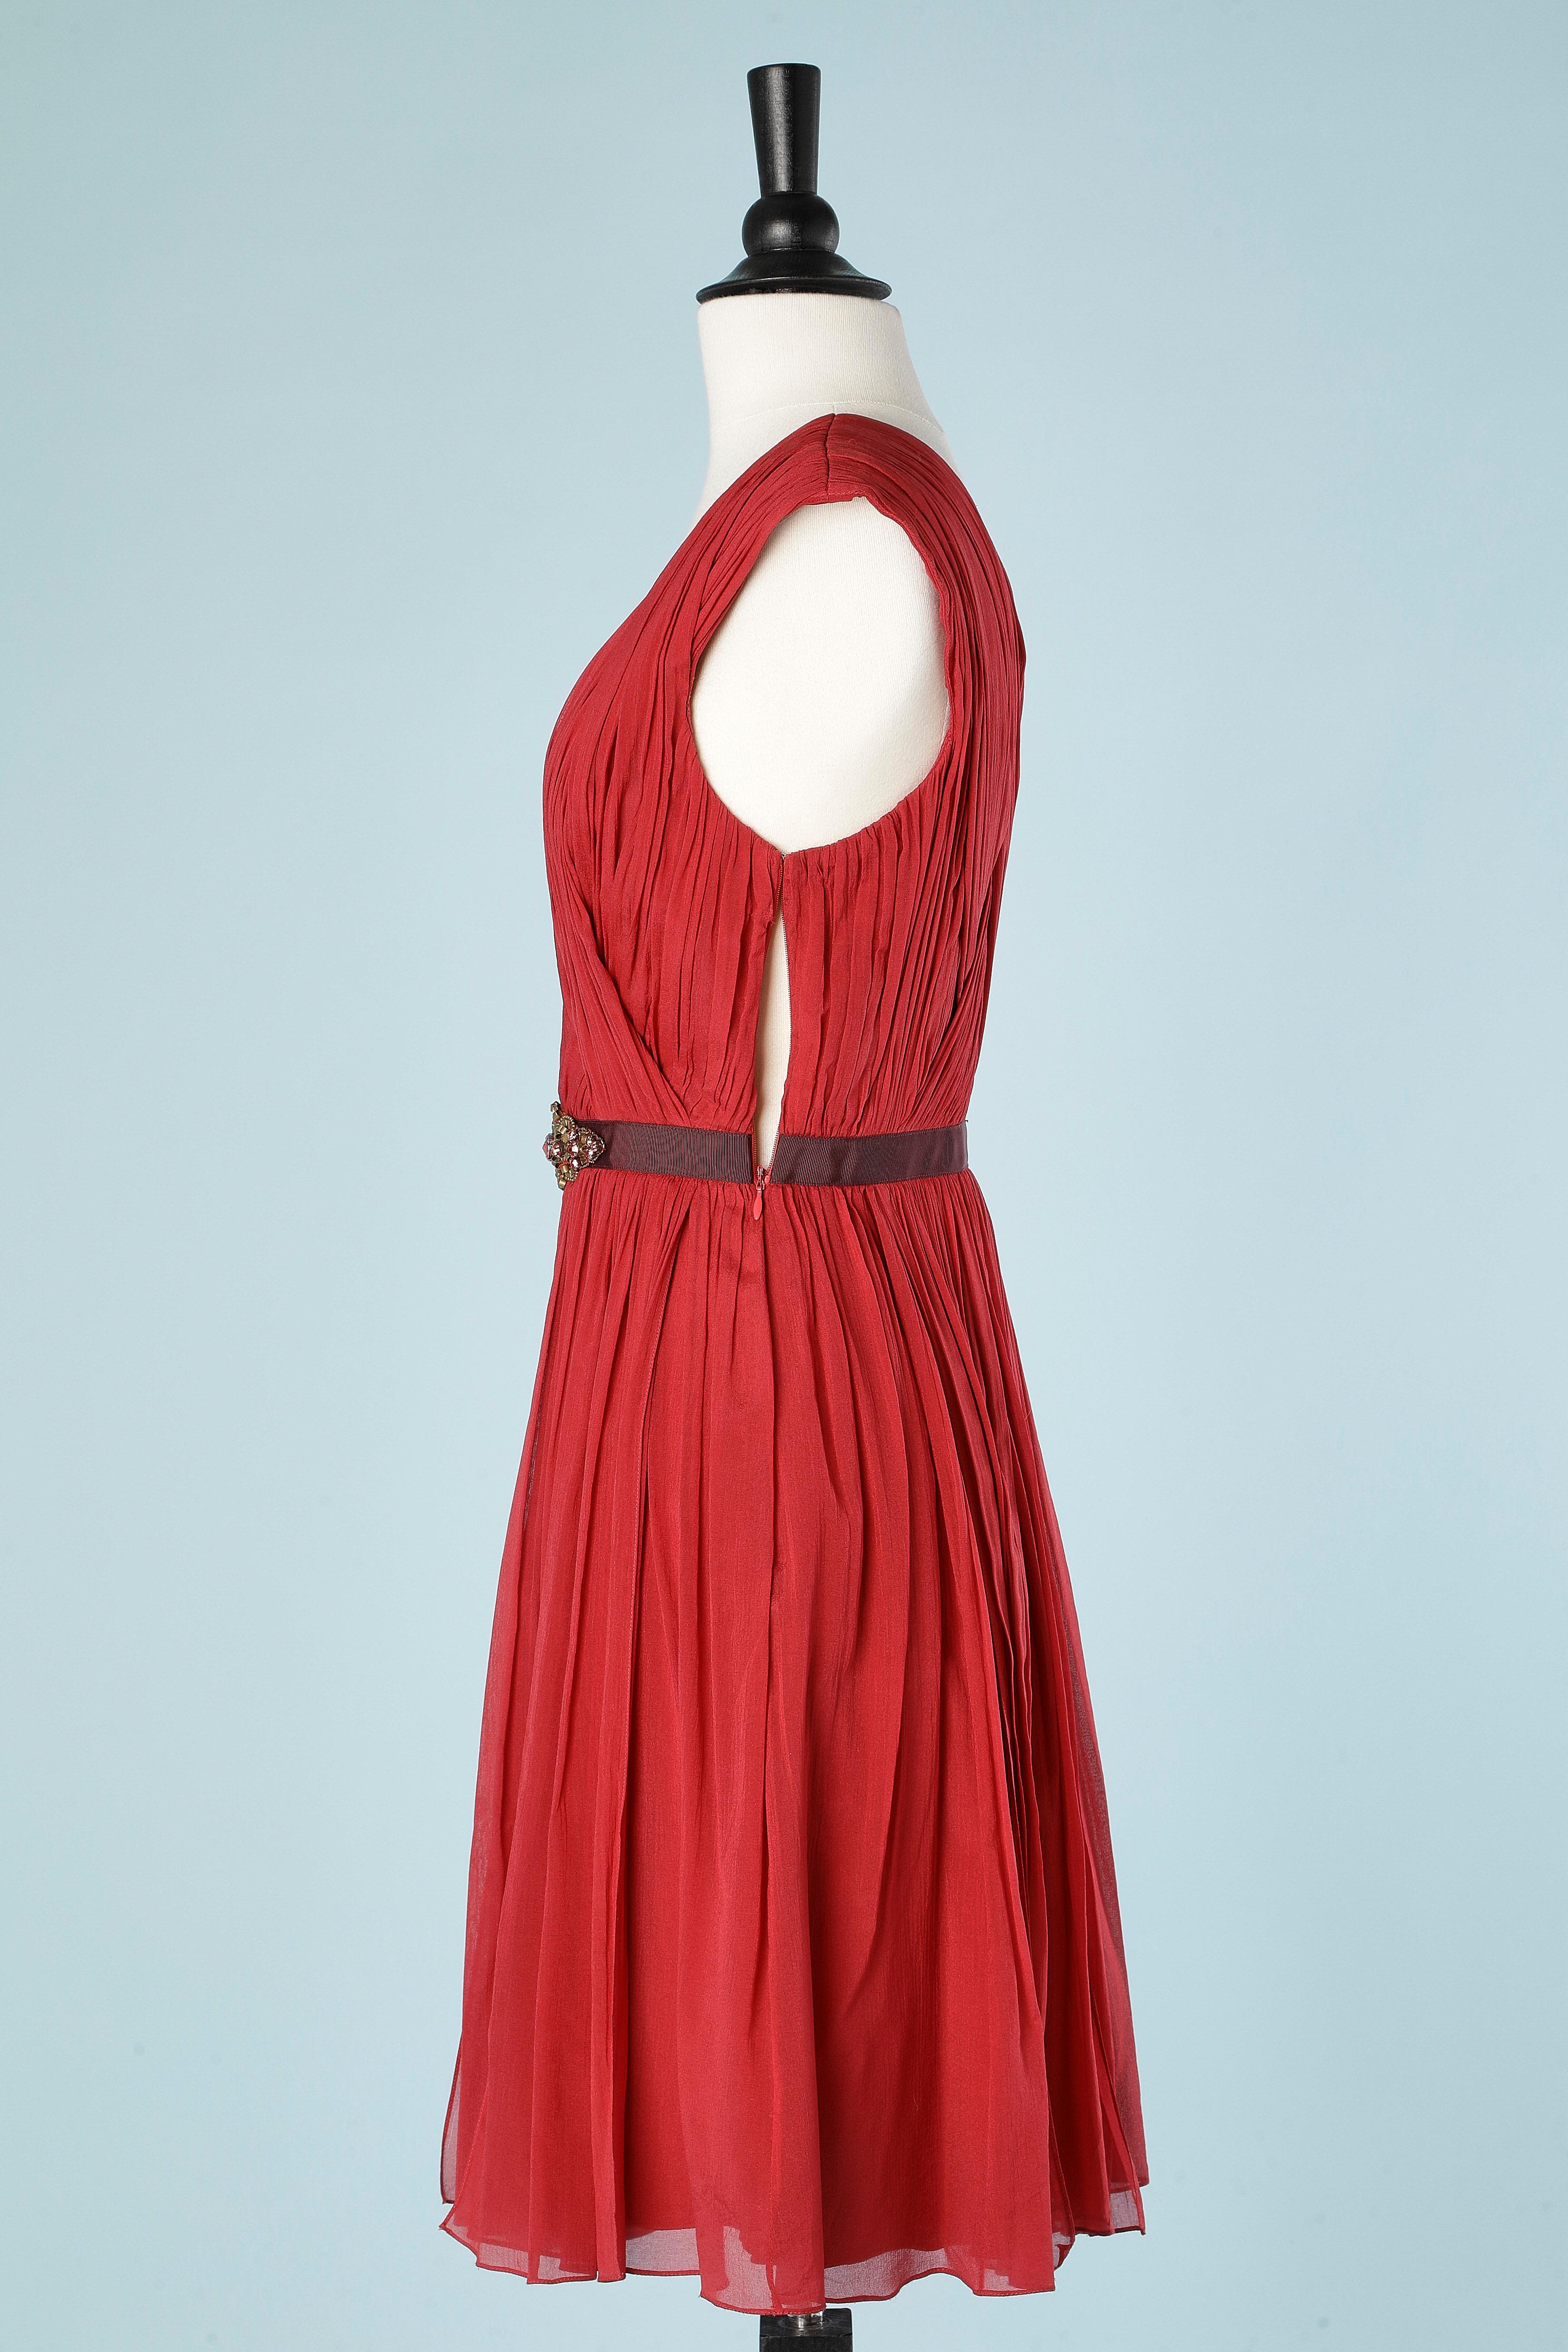 Red chiffon cocktail dress with beaded work Matthew Williamson  In Excellent Condition For Sale In Saint-Ouen-Sur-Seine, FR